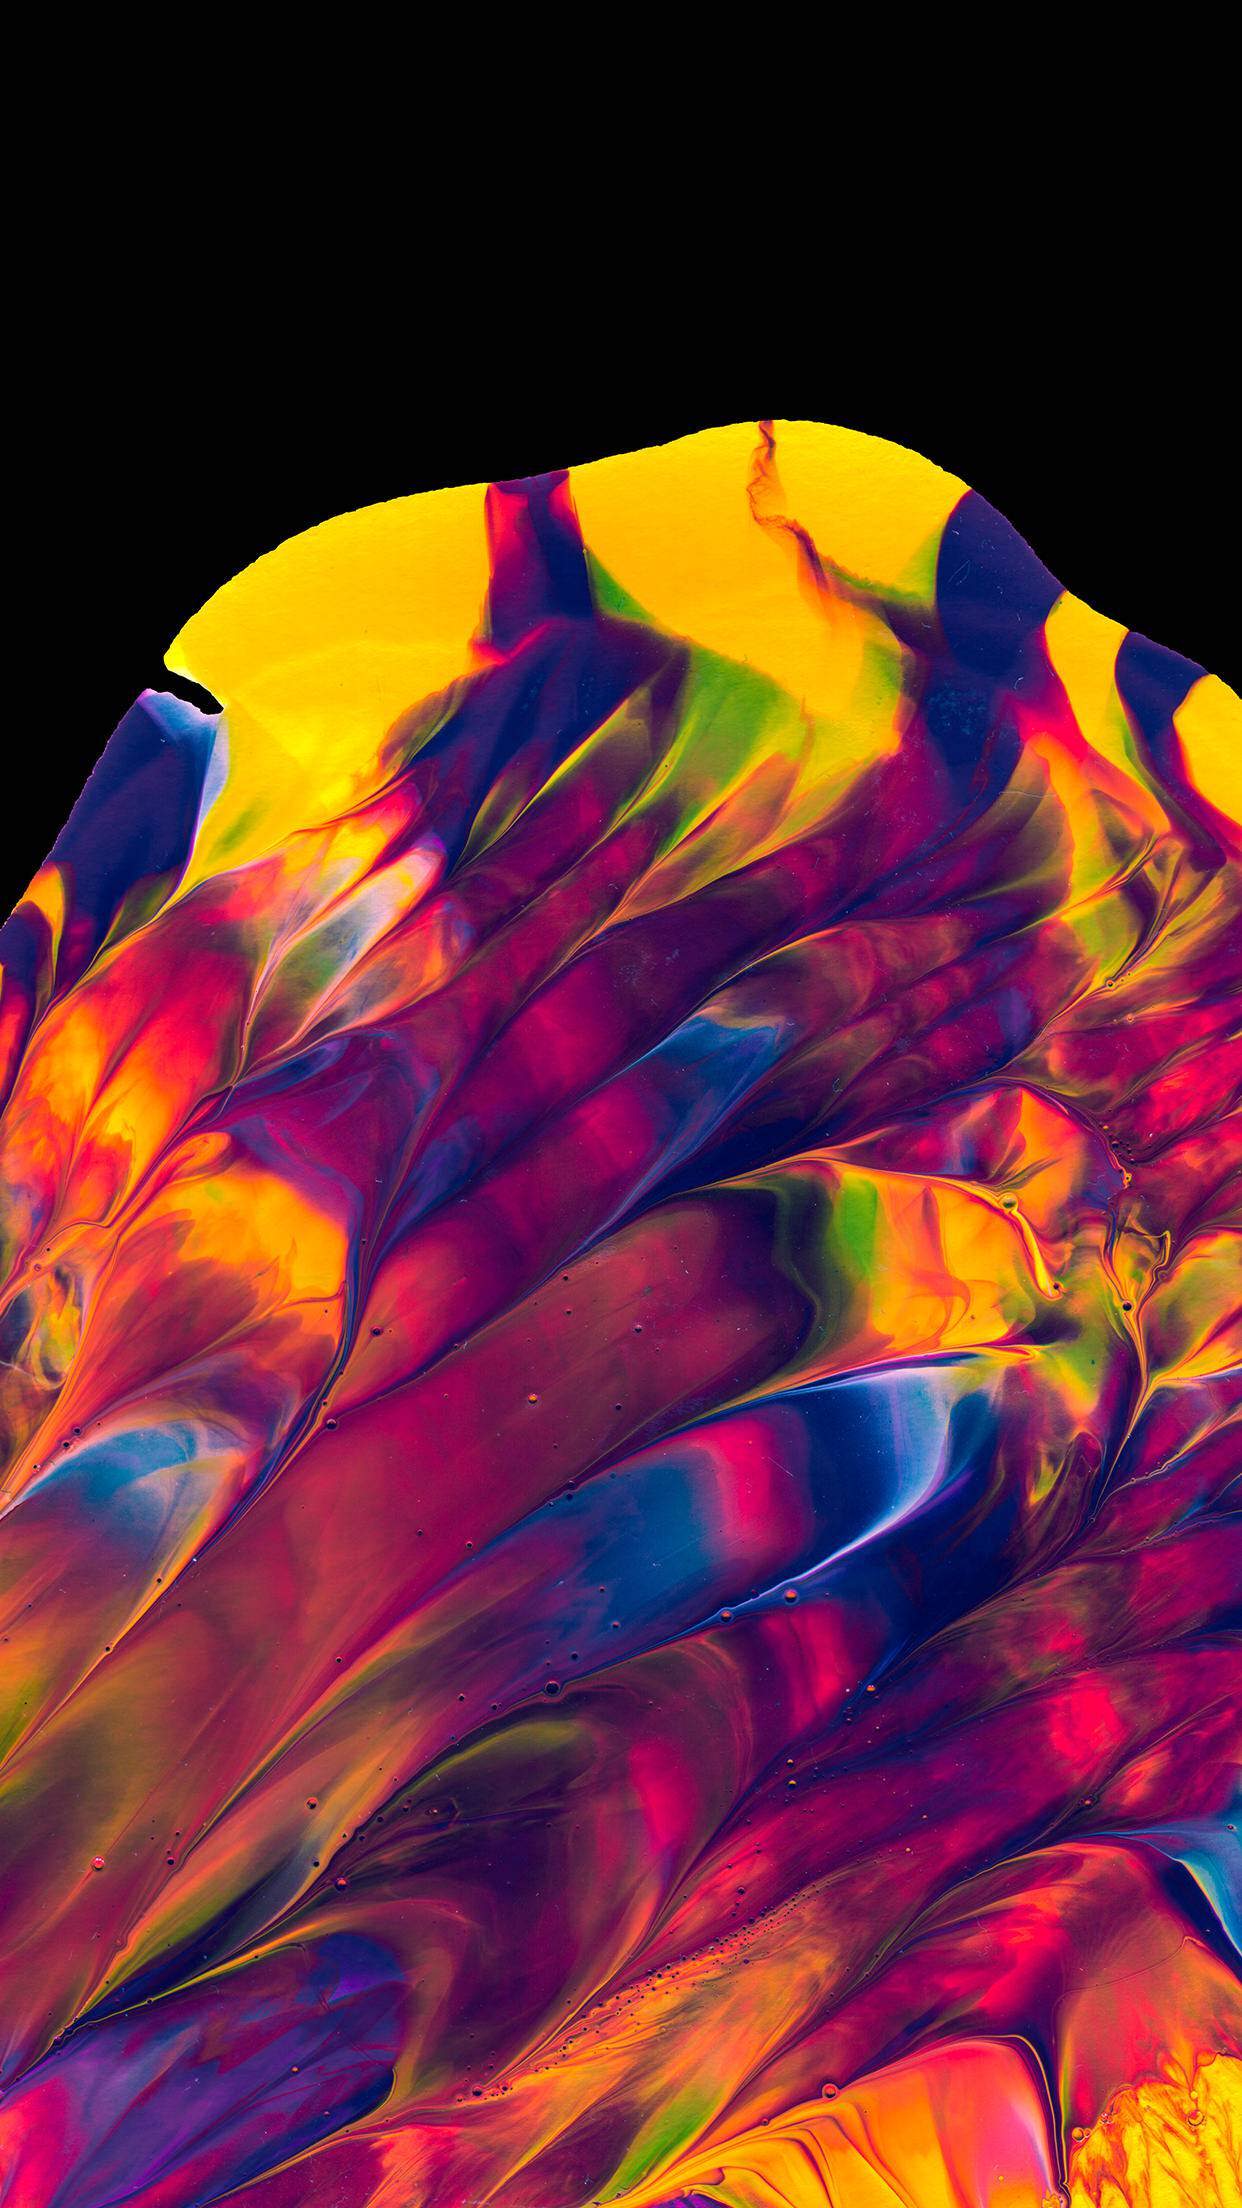 10 Curiously abstract wallpapers for iPhone to behold in 2023  iGeeksBlog